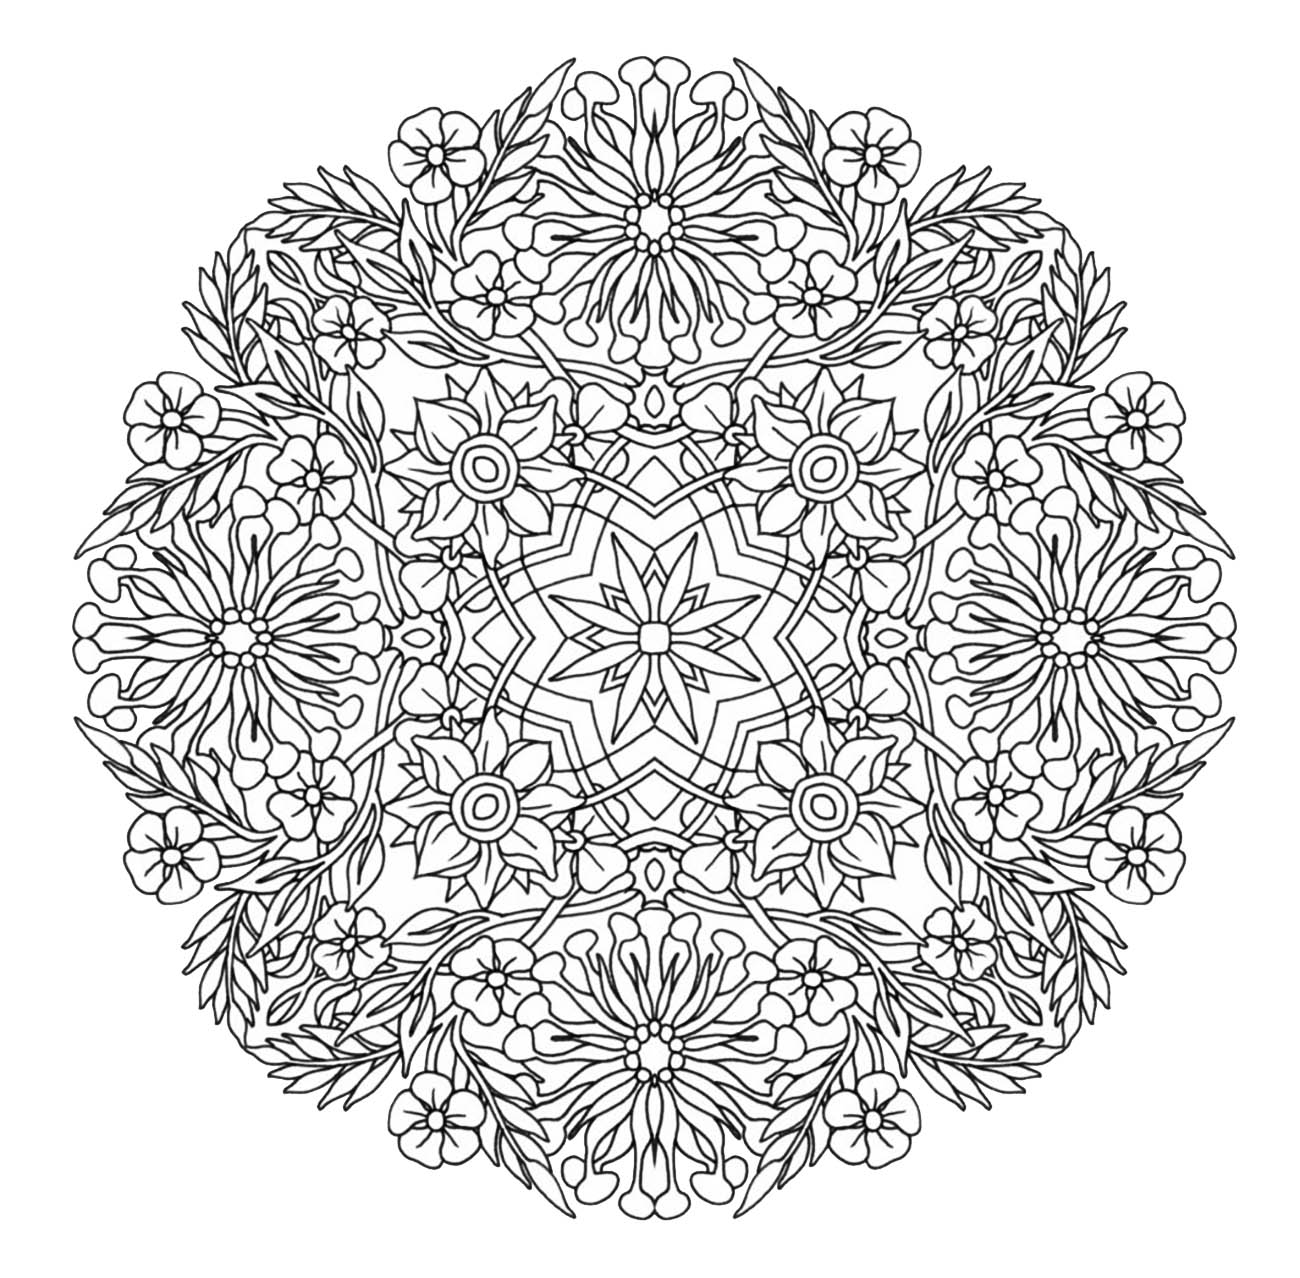 Download Mandala to download in pdf 9 - M&alas Adult Coloring Pages